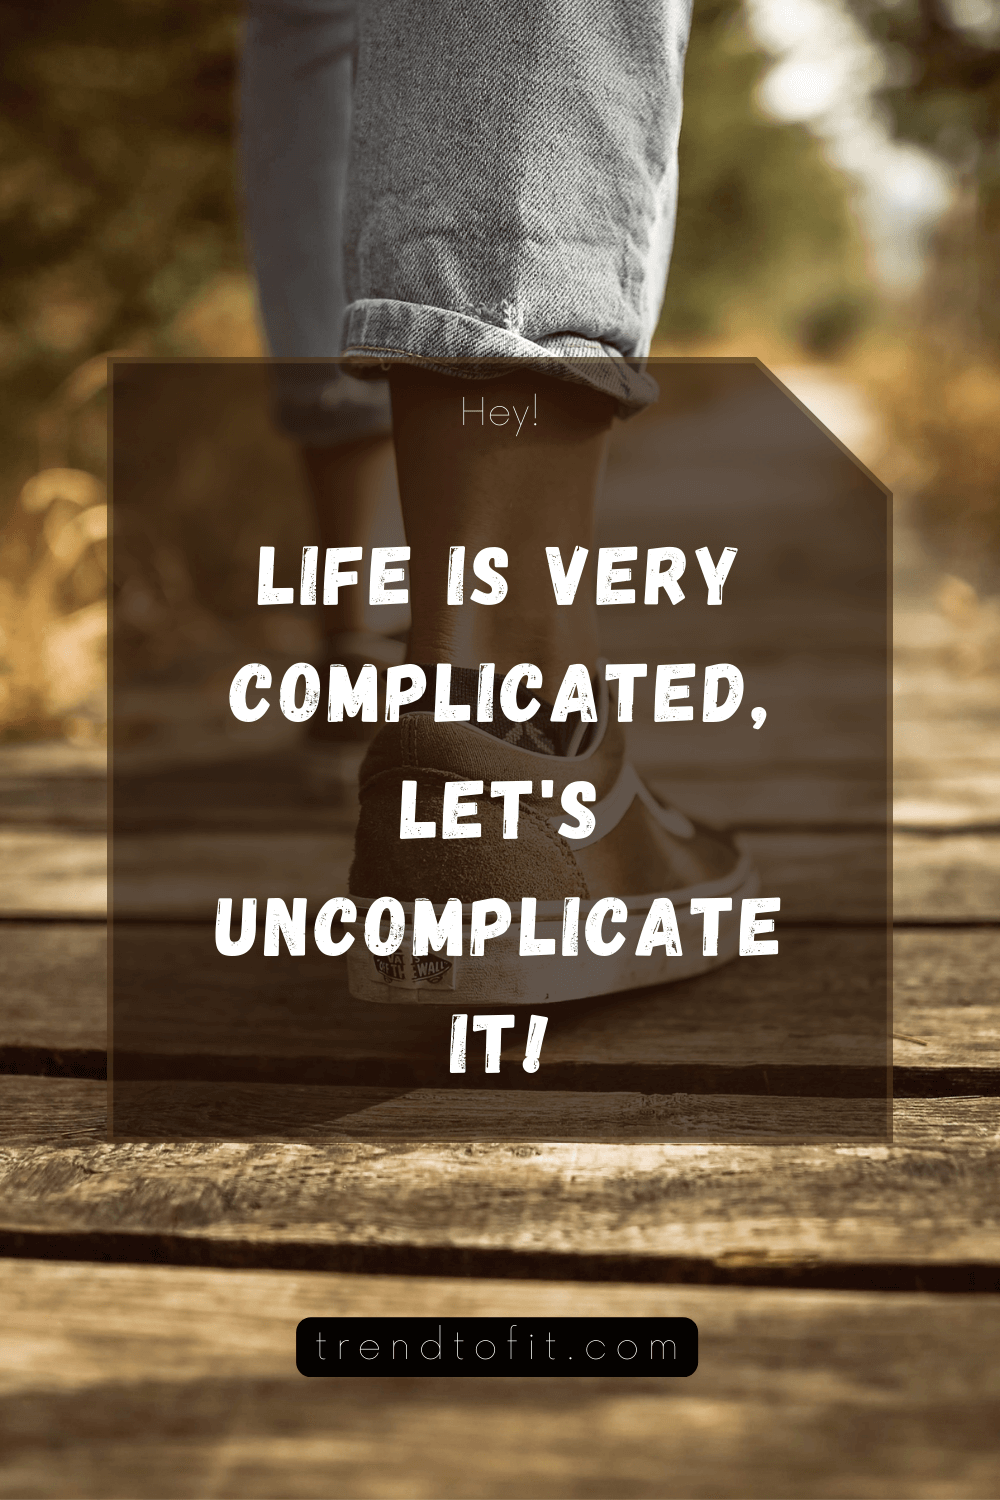 life is very complicated, let's simplify it to get mental happiness